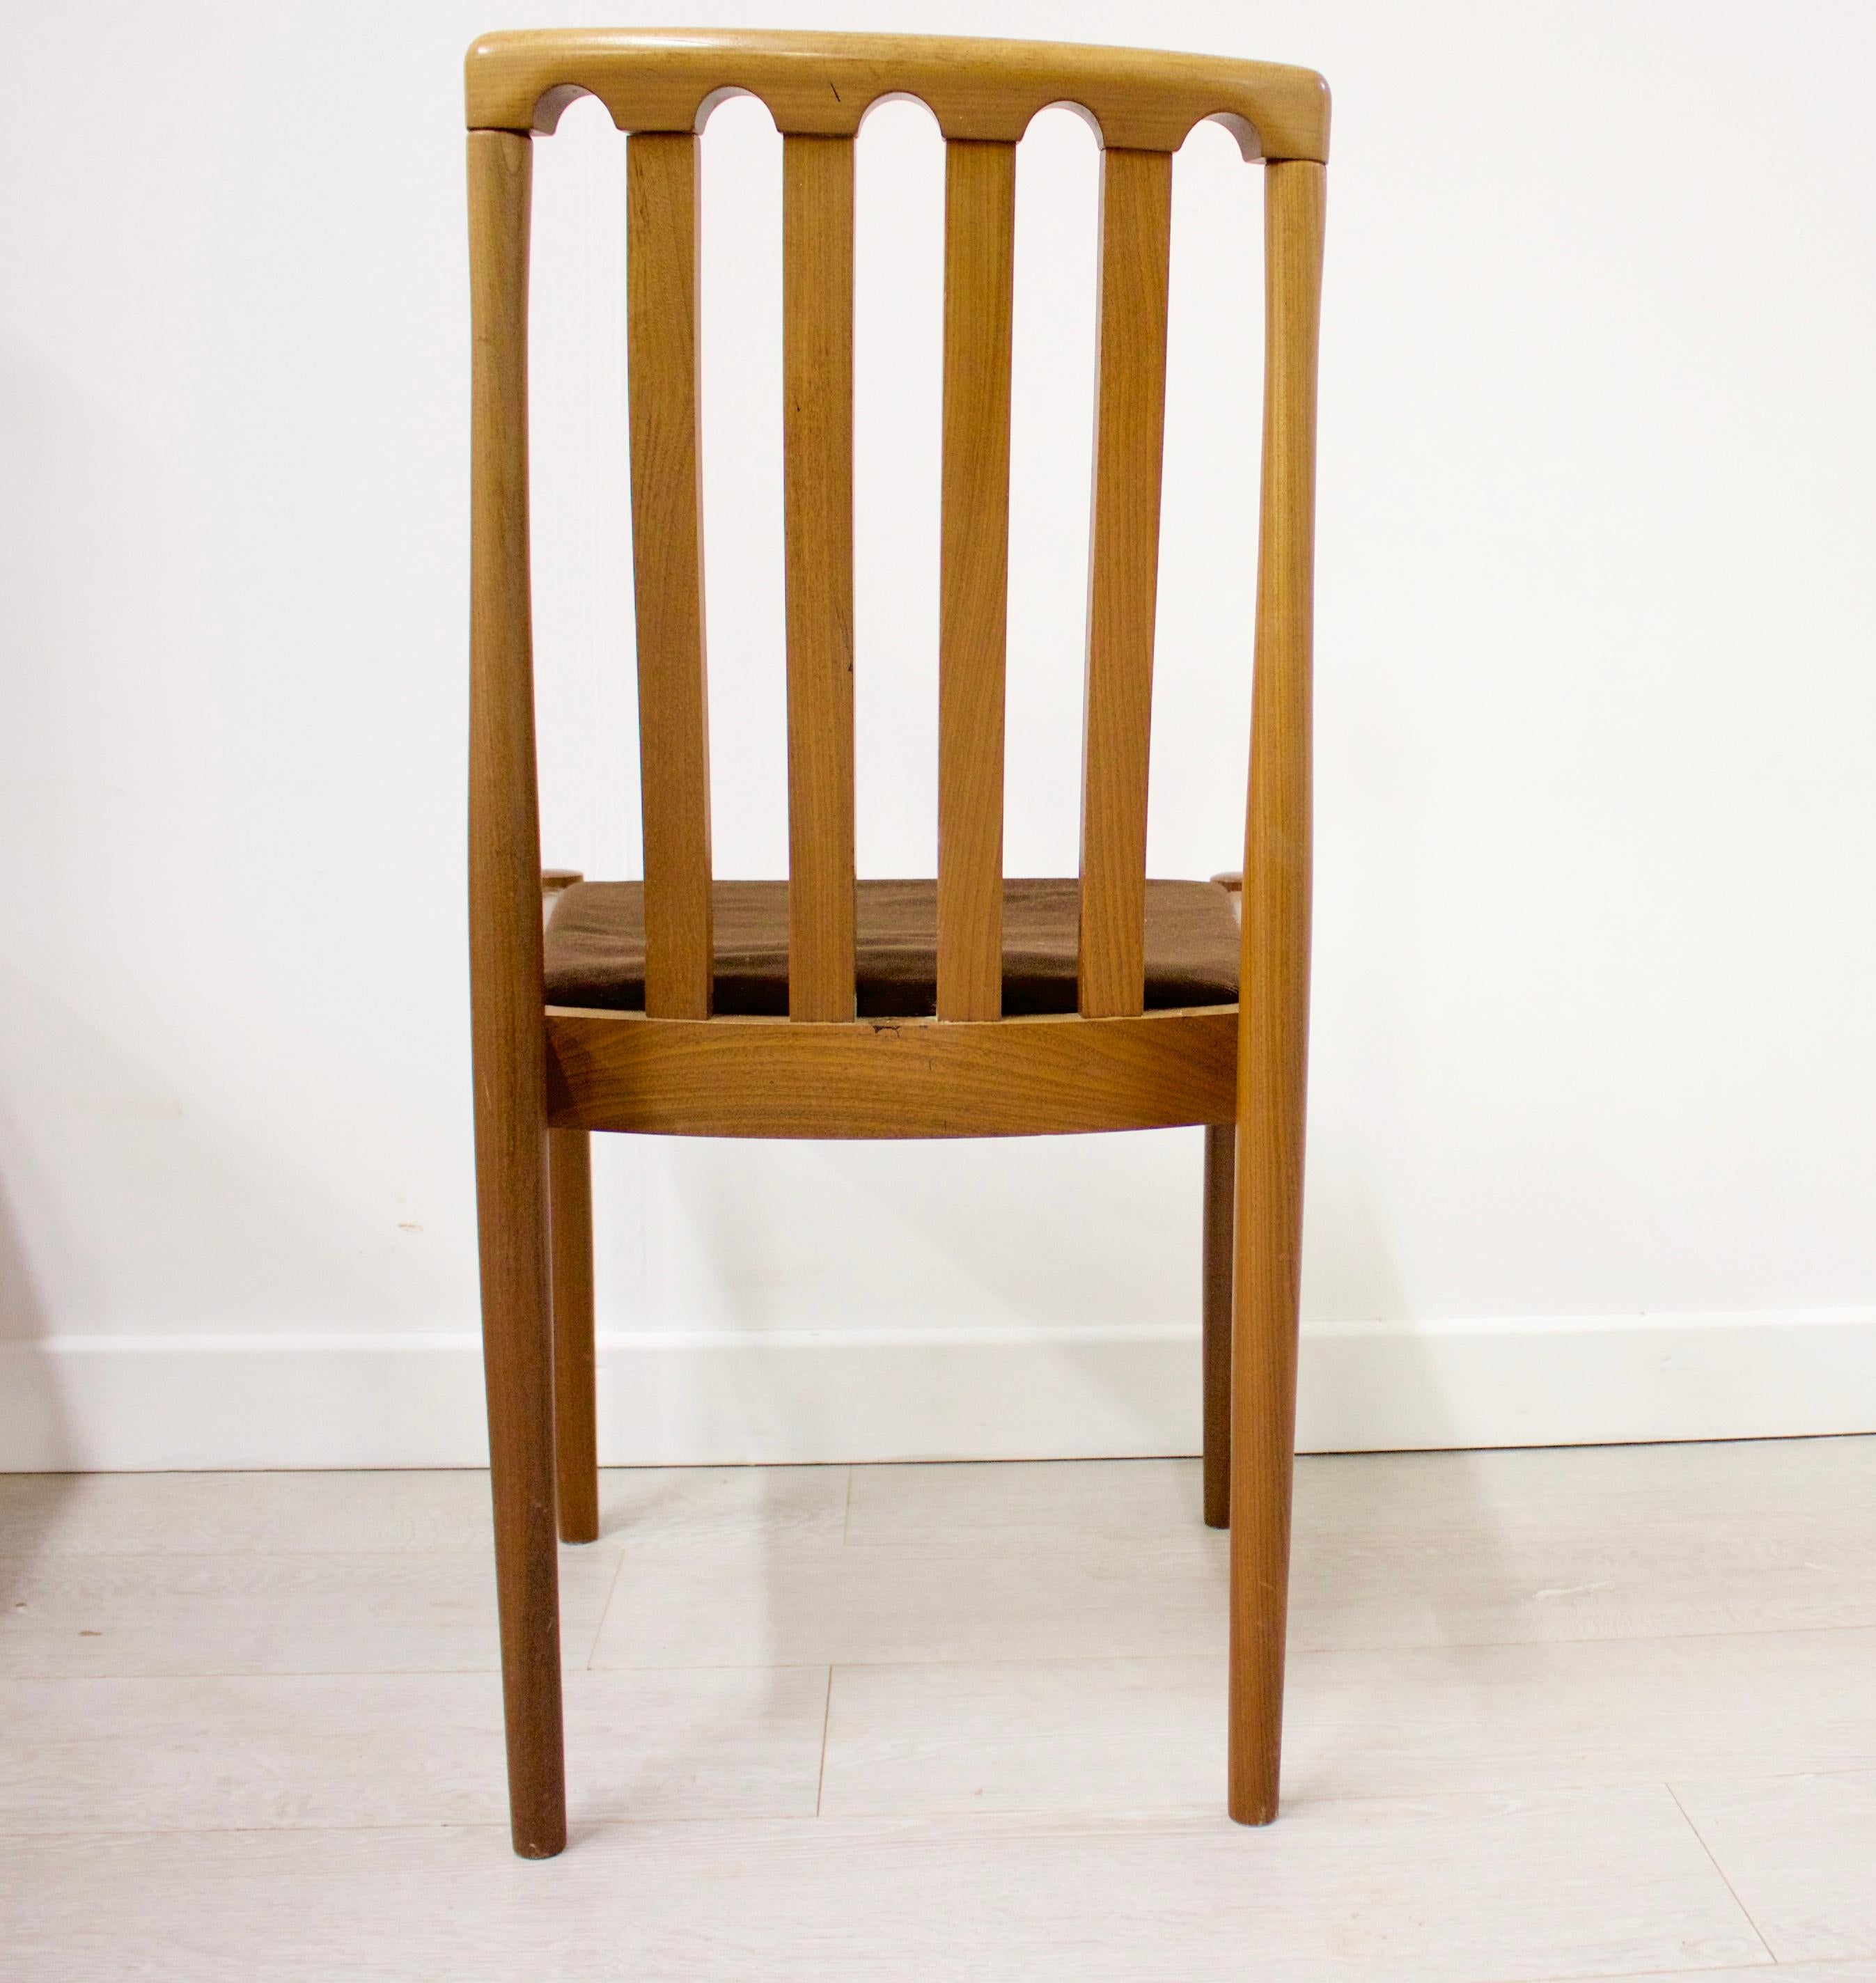 British Midcentury Teak Dining Chairs from Meredew, Set of 4 For Sale